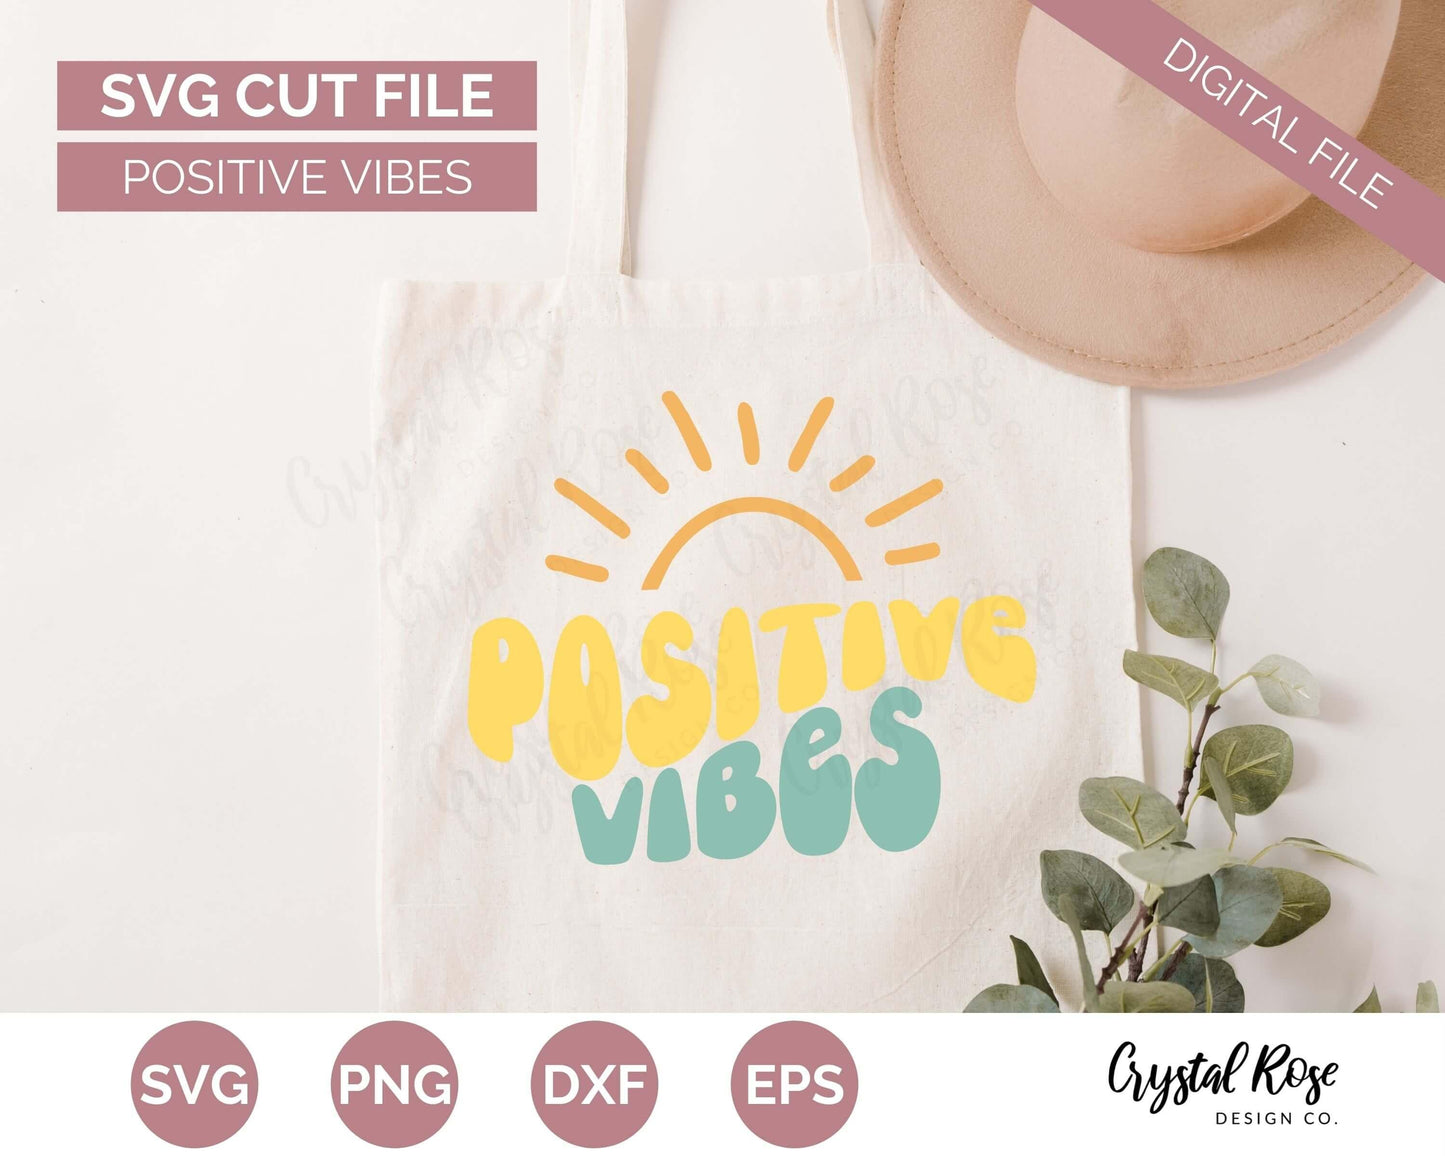 Retro Positive Vibes SVG, Inspirational SVG, Digital Download, Cricut, Silhouette, Glowforge (includes svg/png/dxf/eps)